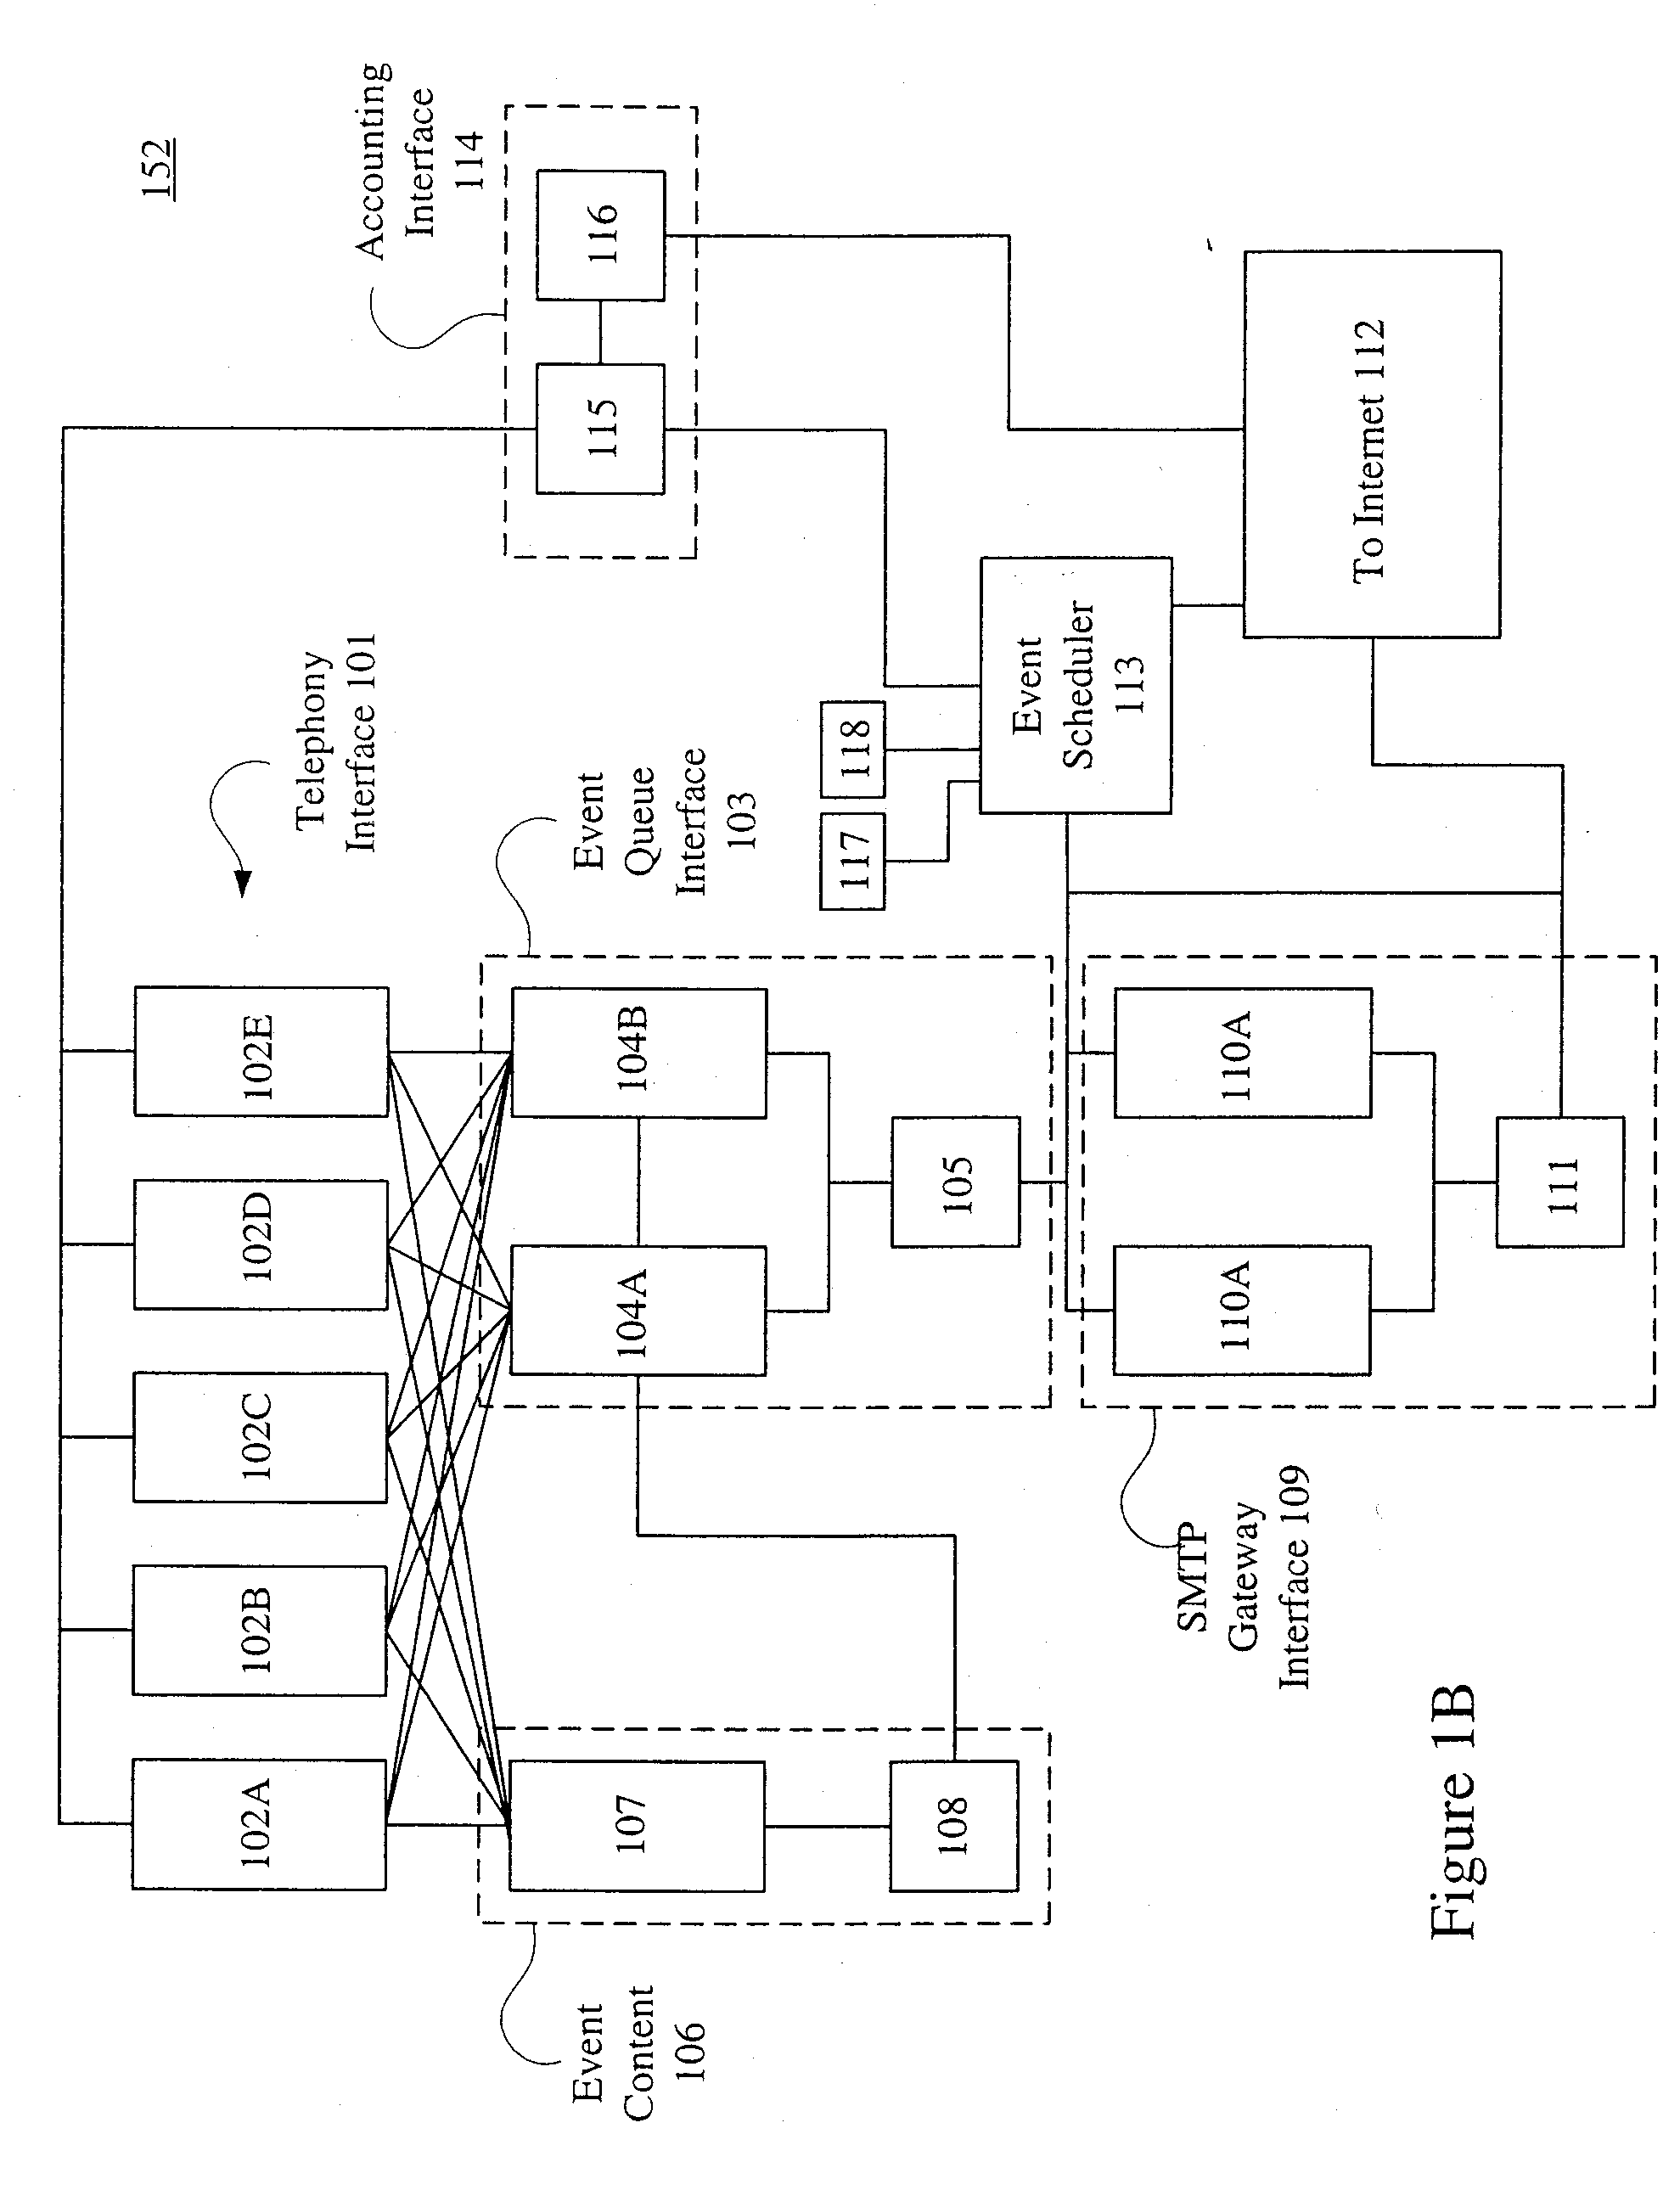 Method and system for providing interactive telephony sessions